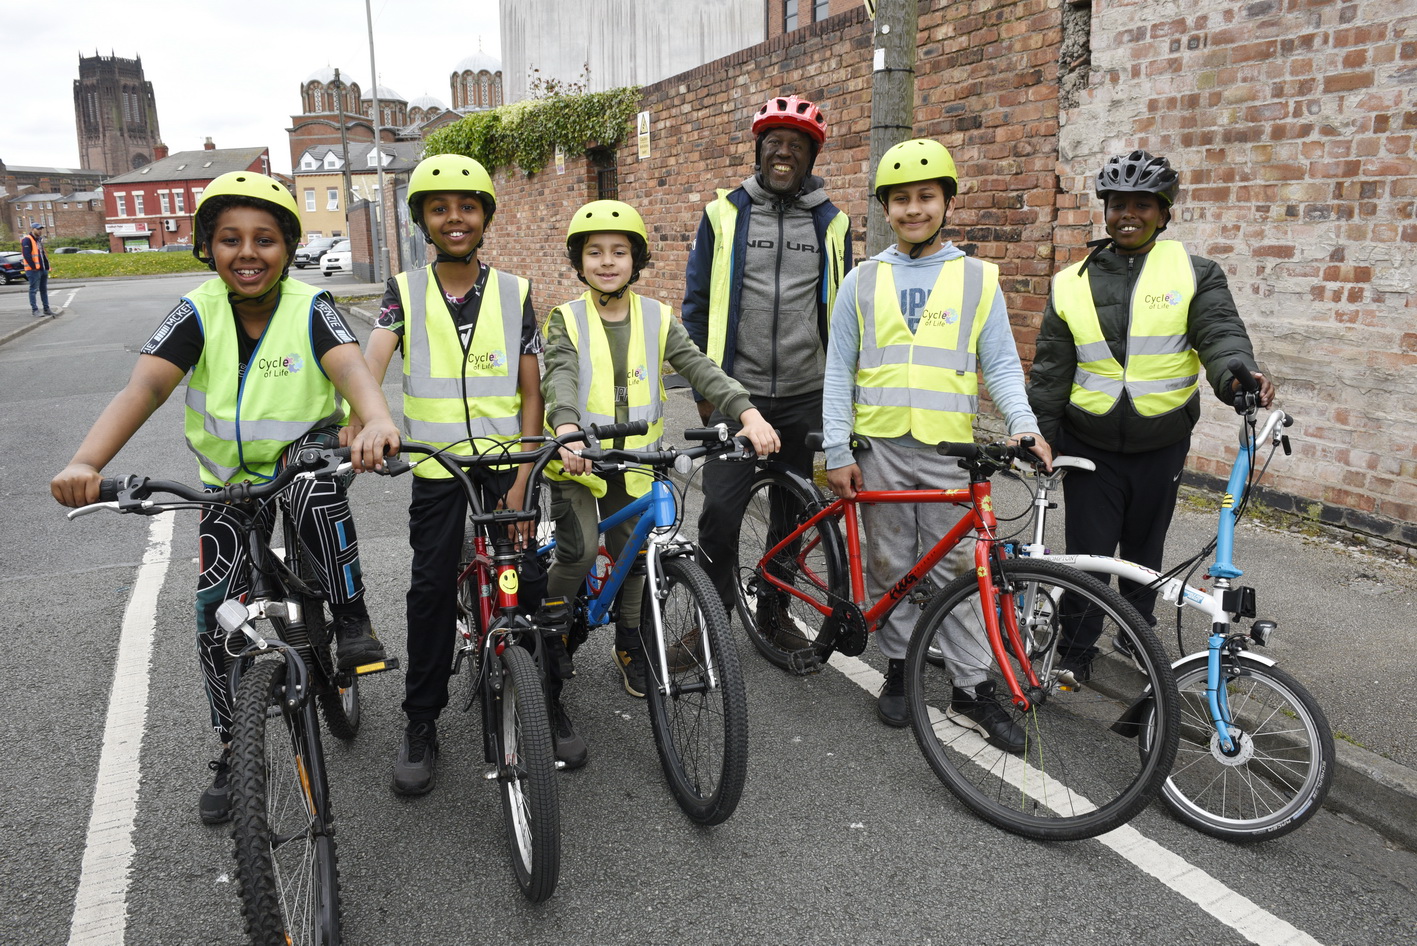 A group of young cyclists are standing on or with their bicycles. They are wearing Cycle of Life high vis vests, and smiling. Behind them is a Bikeability instructor.